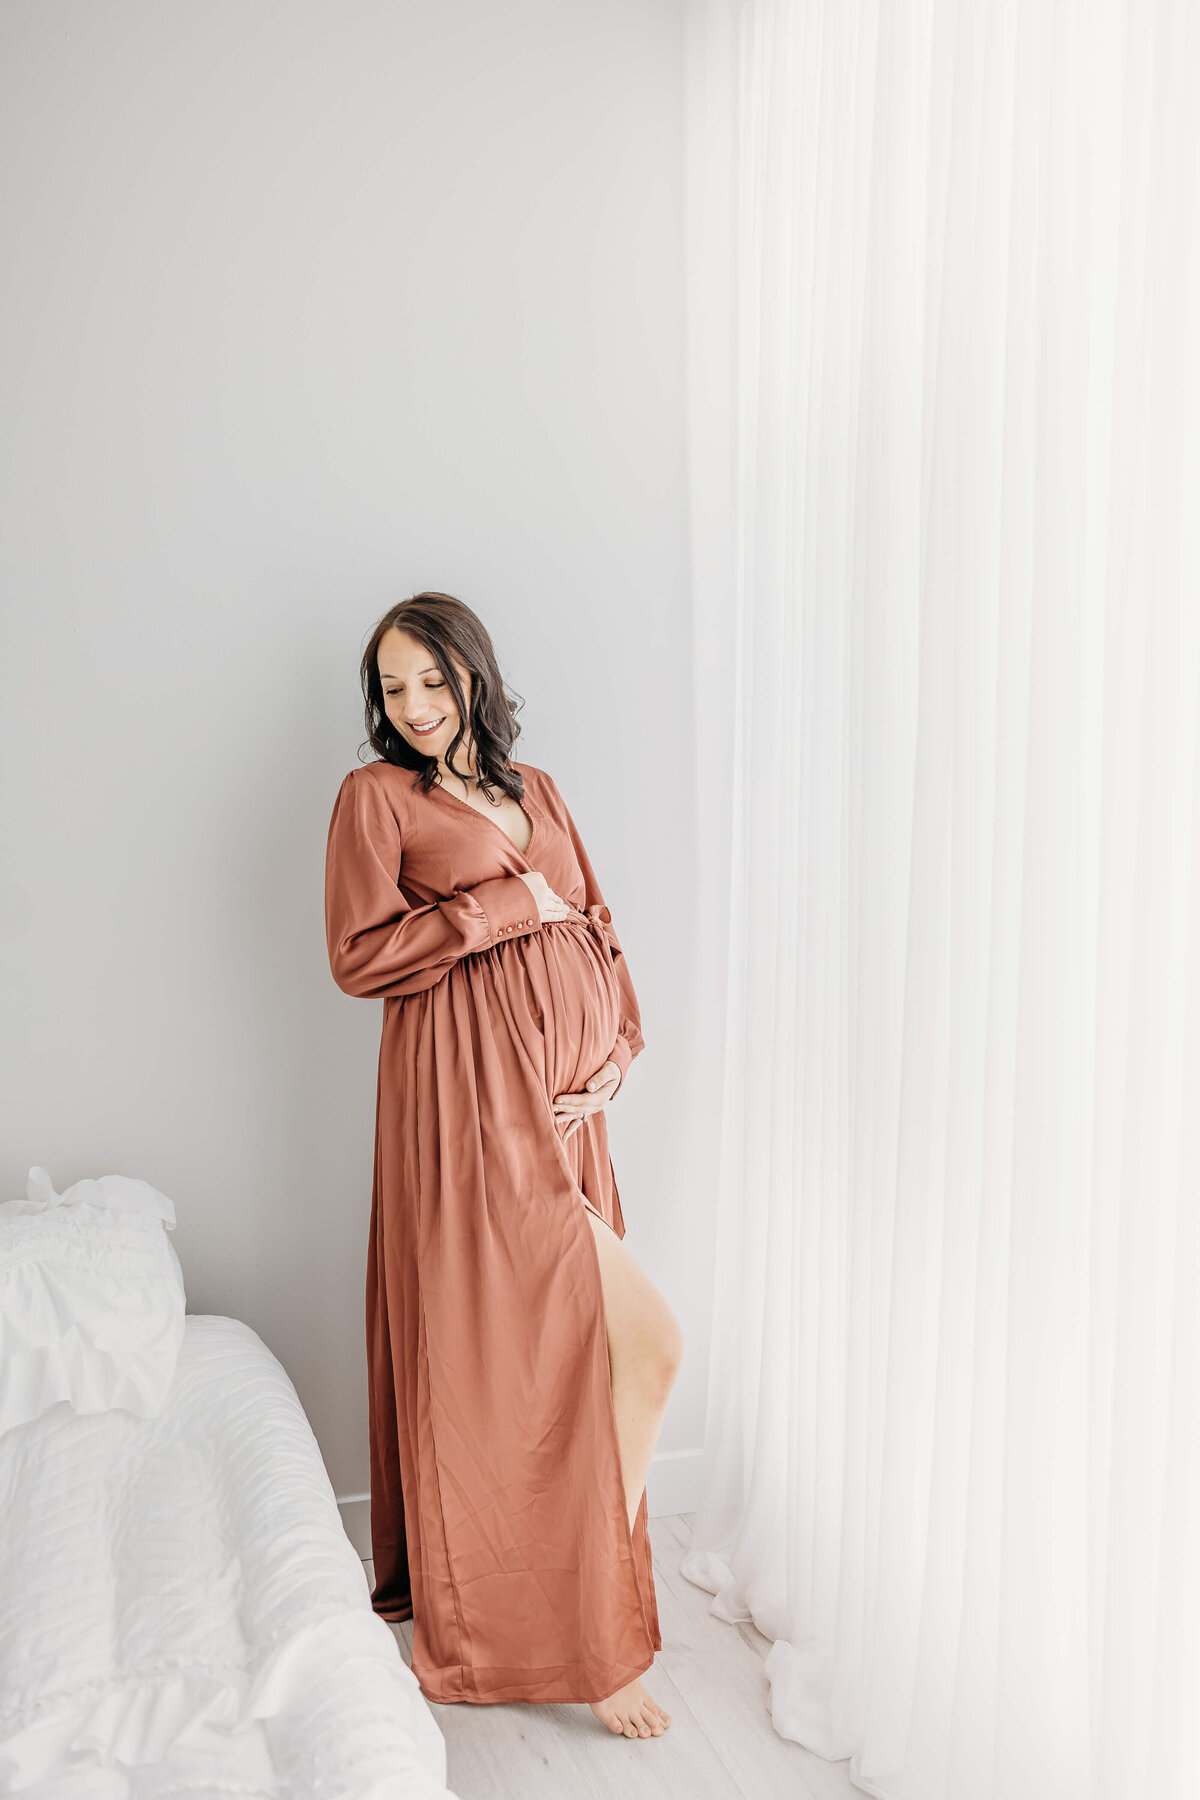 Happy mom with brown hair and dark pink gown standing near window for maternity pictures